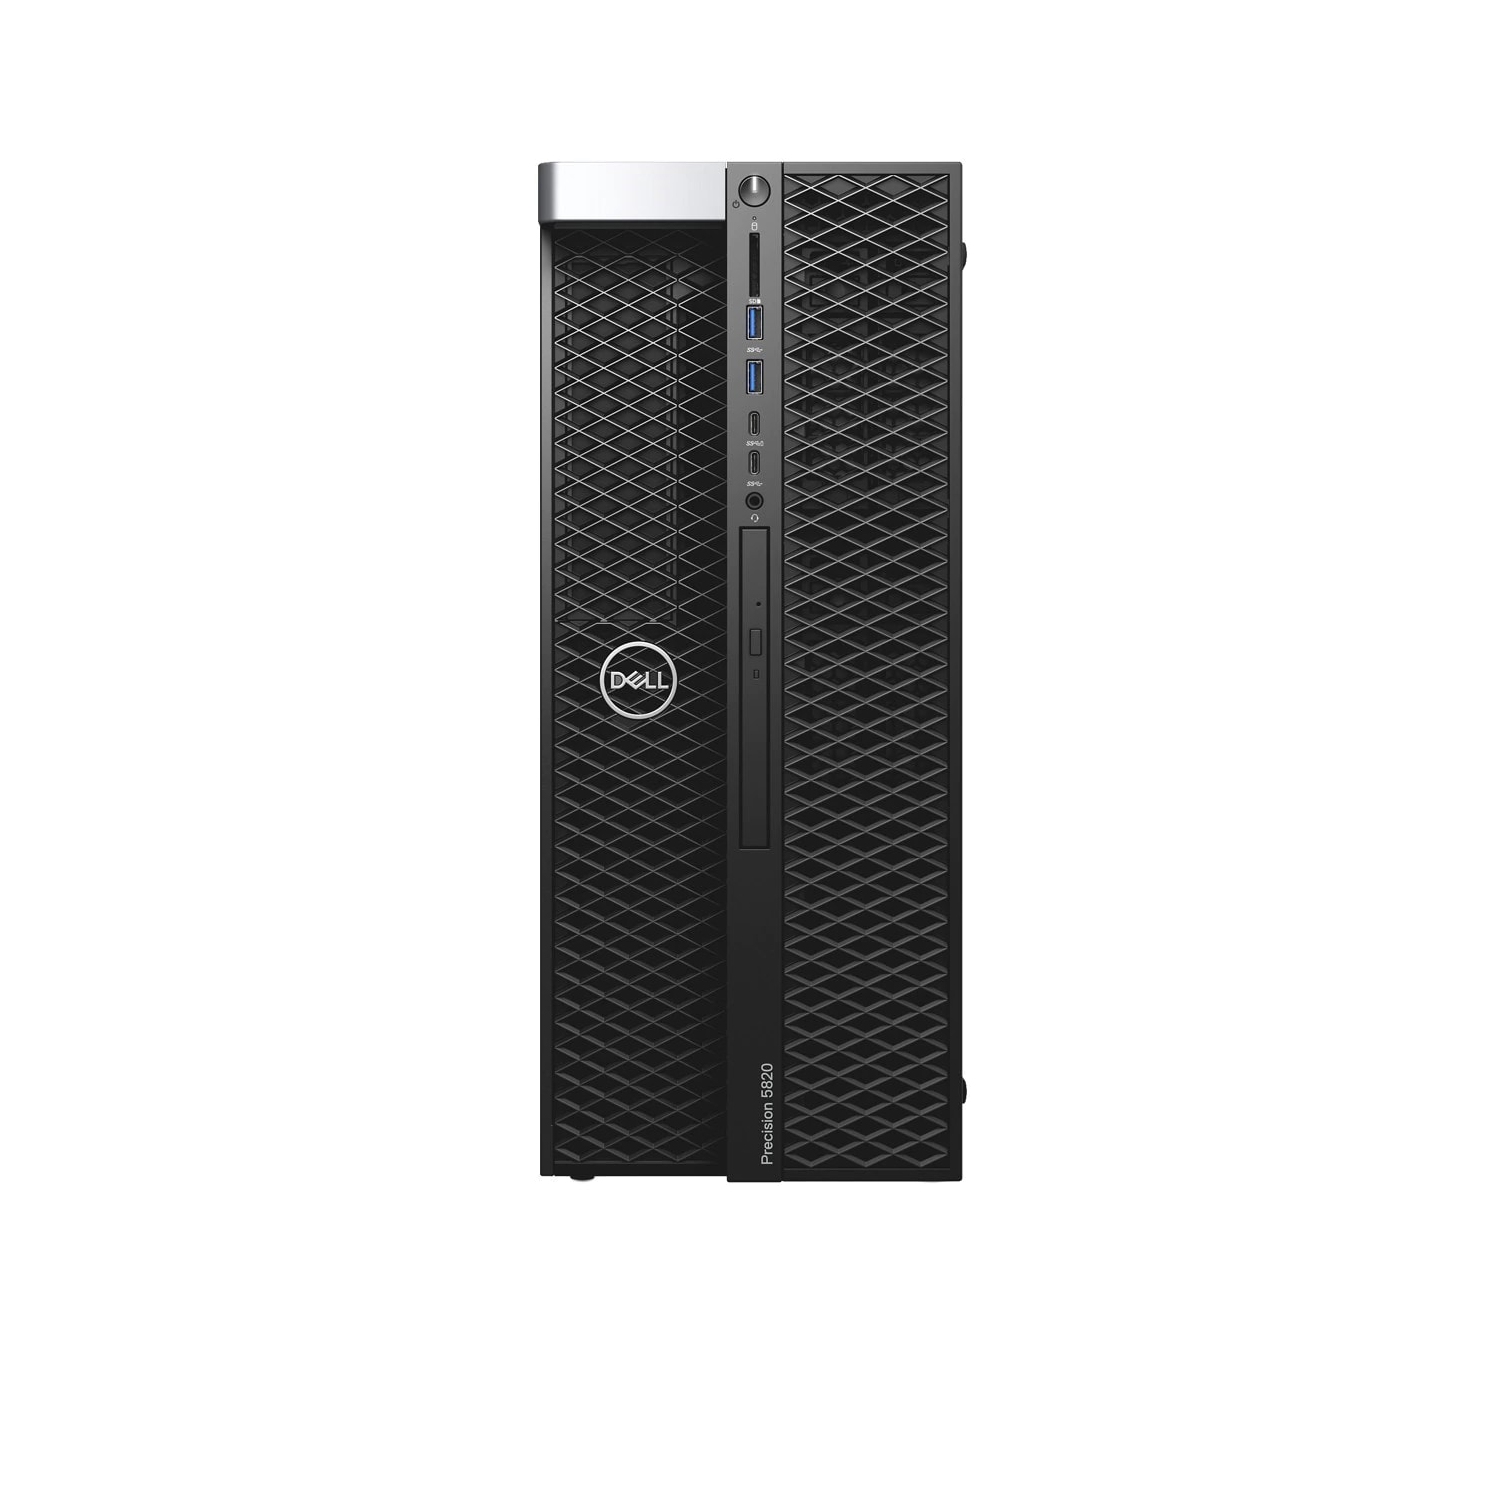 Refurbished (Excellent) - Dell Precision T5820 Workstation Desktop (2018), Core Xeon W, 4TB HDD + 4TB HDD, 32GB RAM, Quadro P2200, 10 Cores @ 4.5 GHz Certified